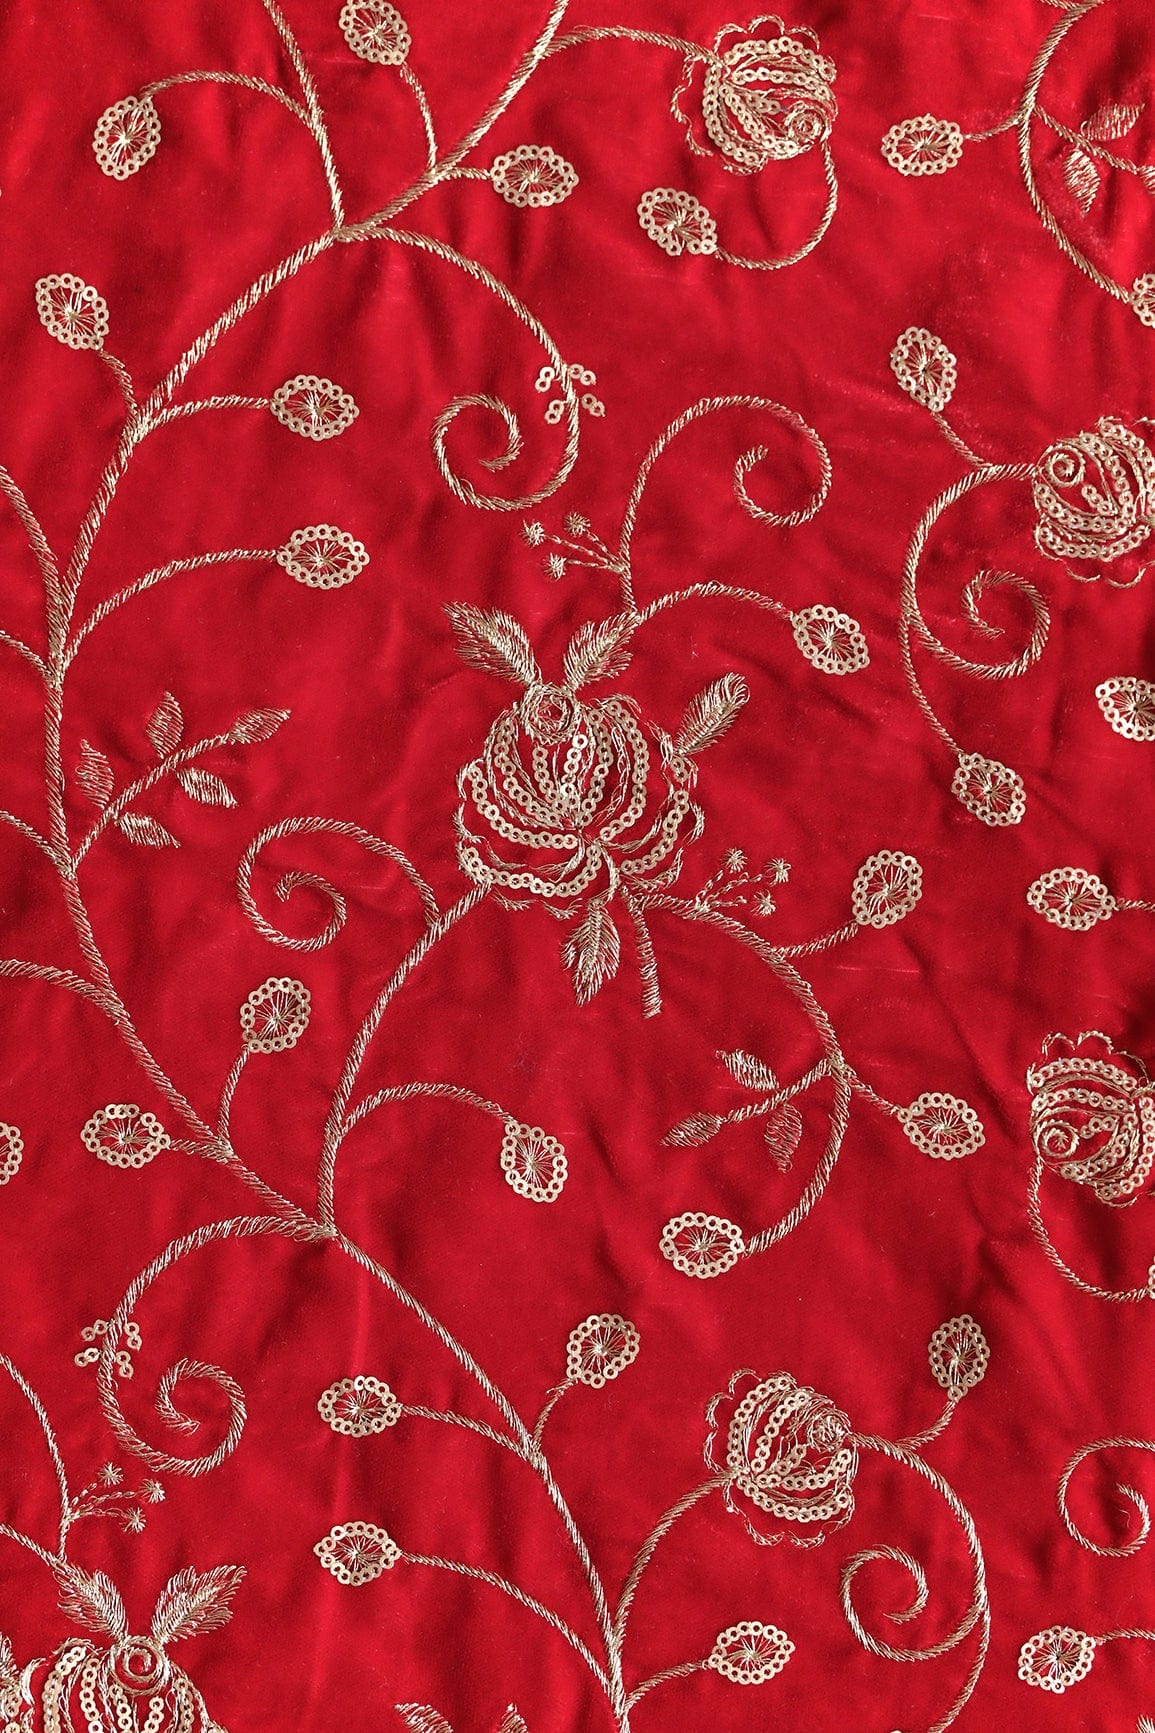 doeraa Embroidery Fabrics Gold Sequins With Gold Zari Beautiful Floral Embroidery On Red Velvet Fabric